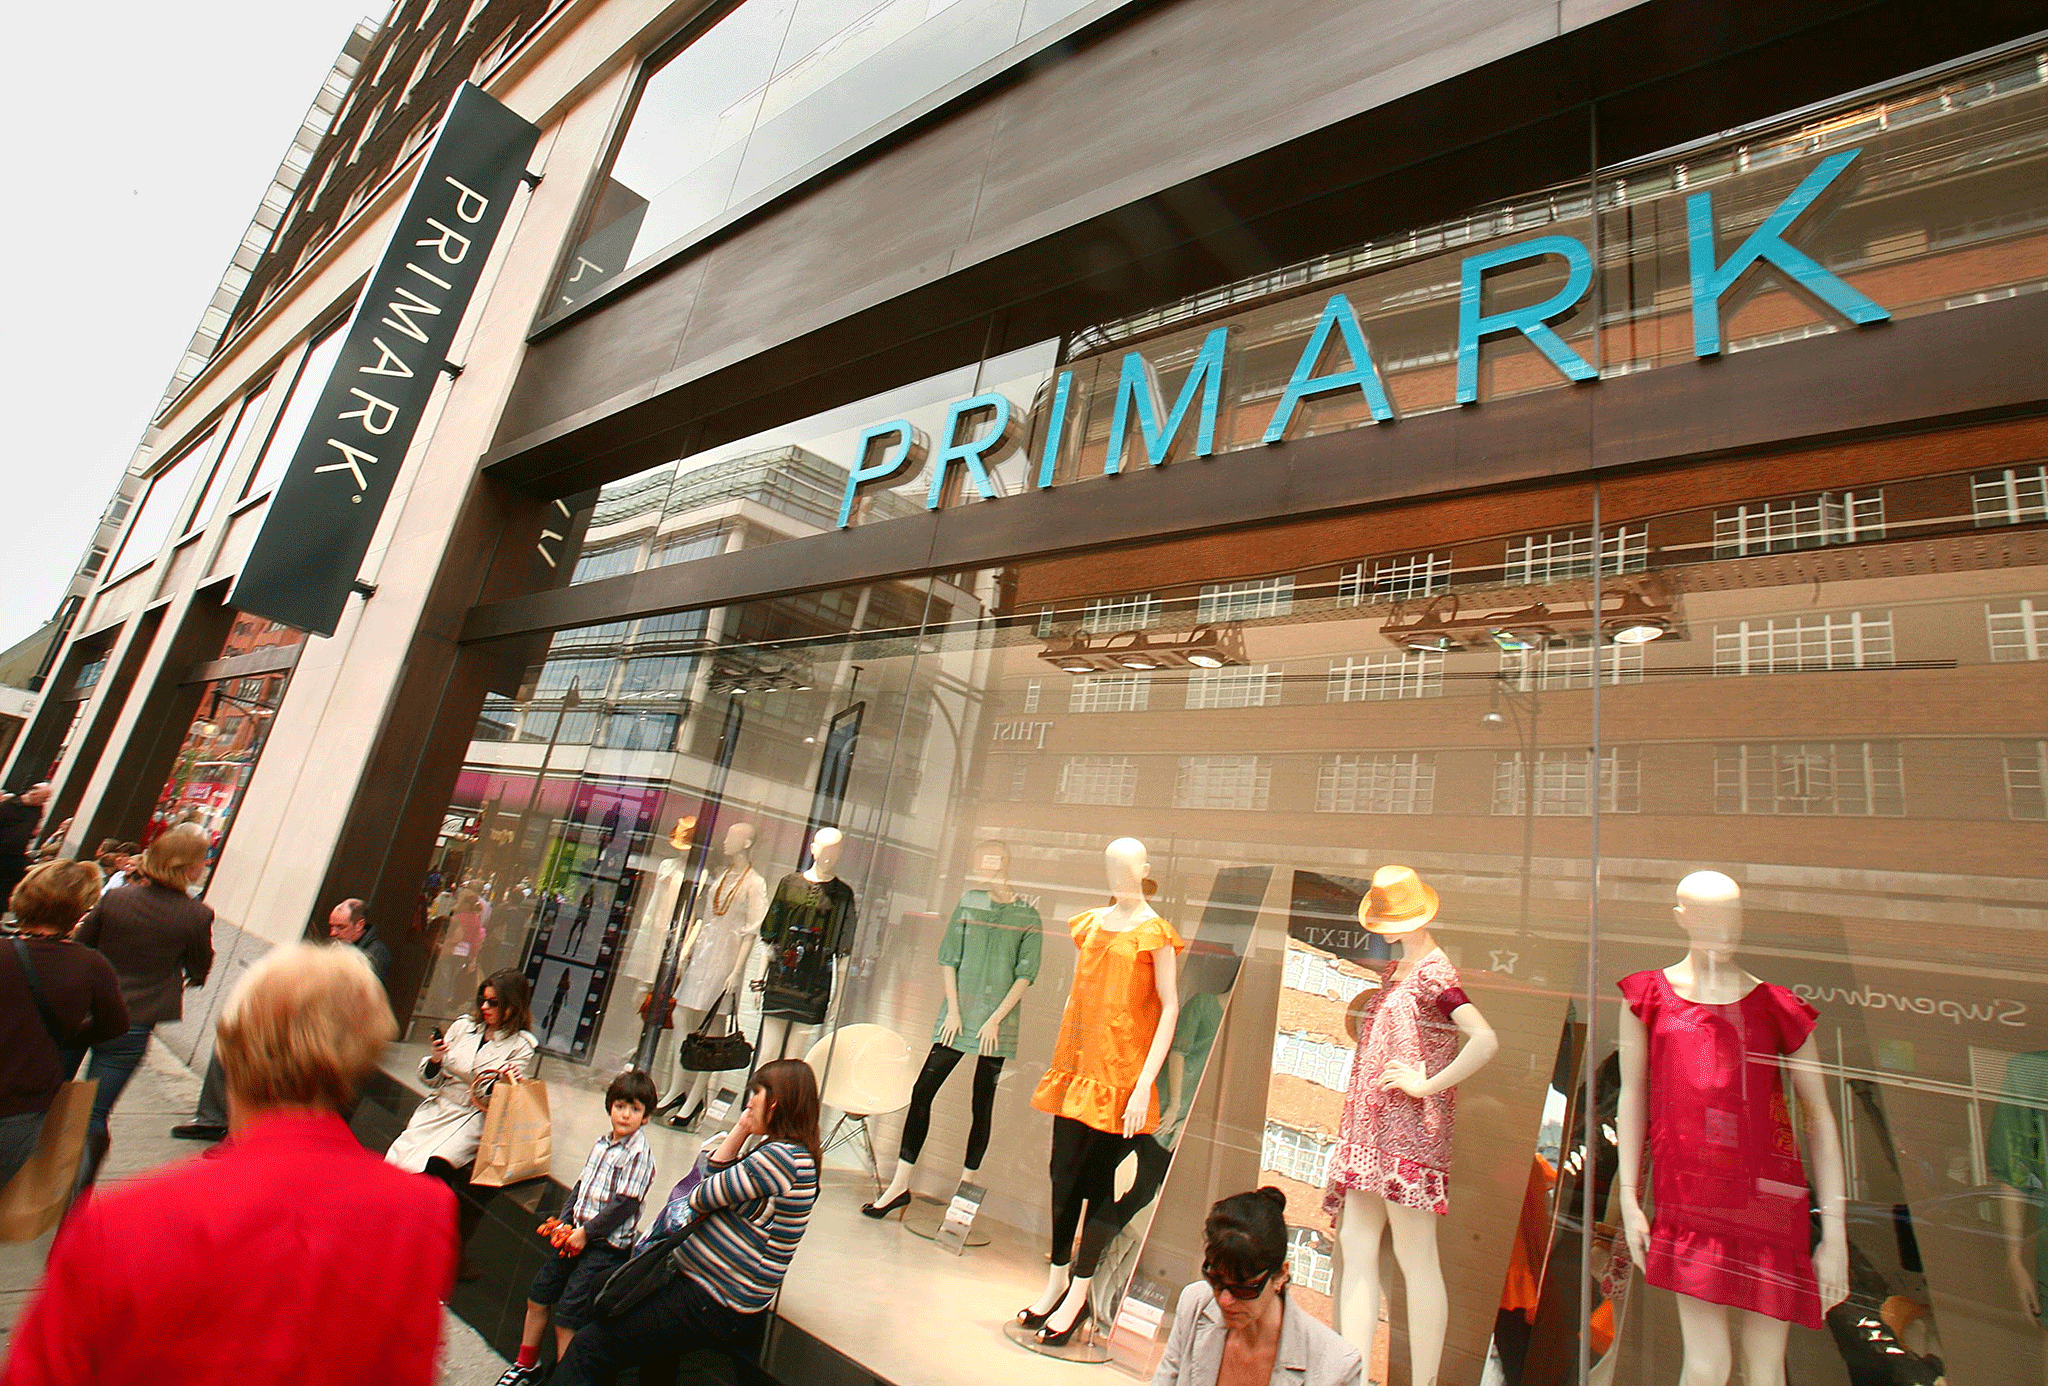 Primark is now an anchor tenant